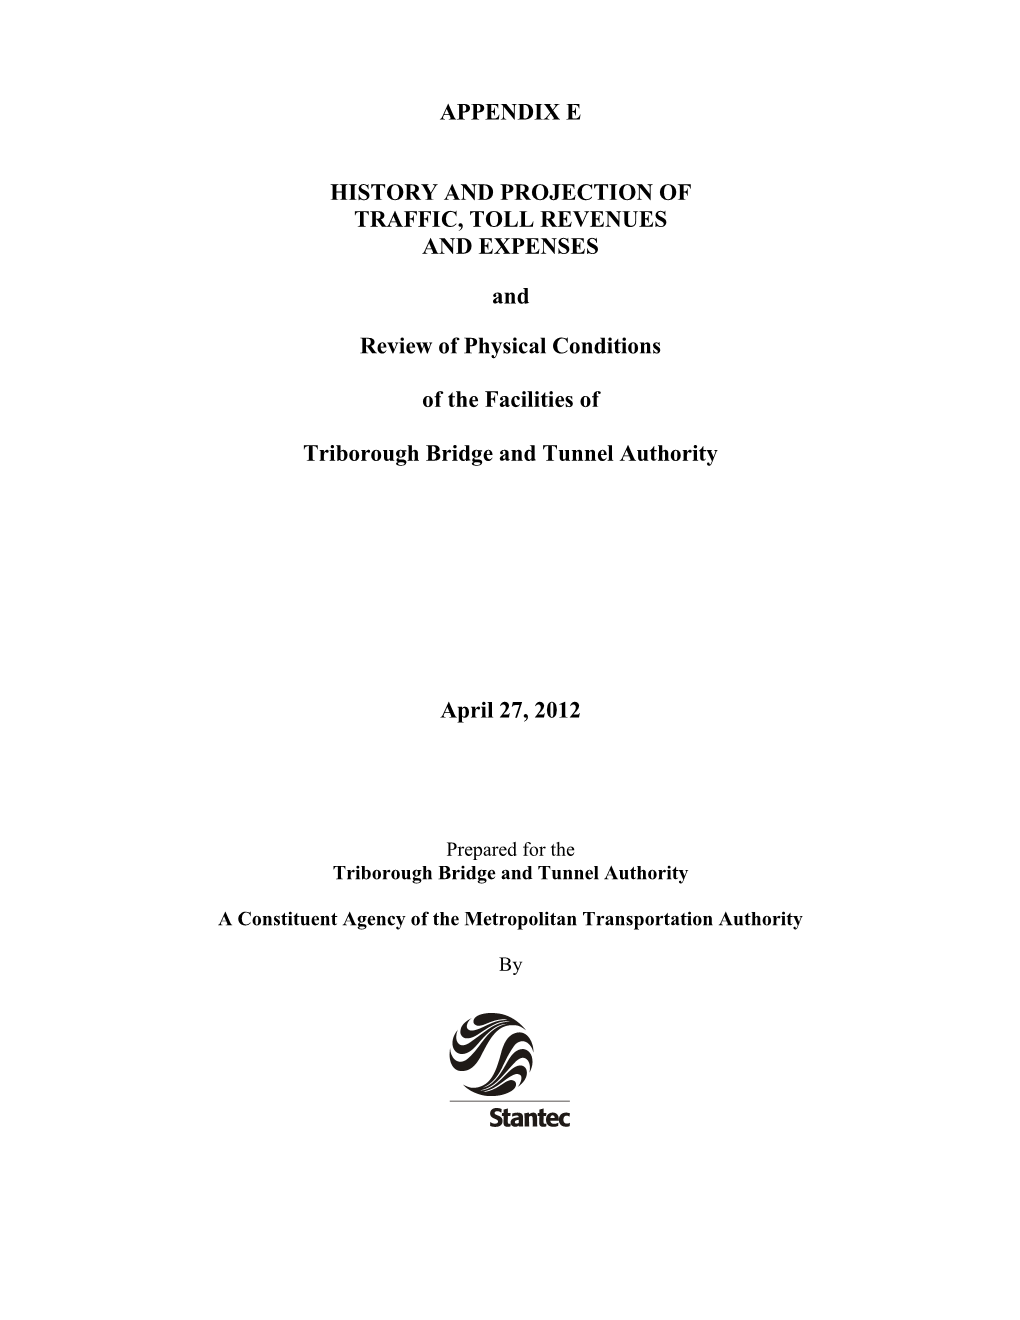 Appendix E History and Projection of Traffic, Toll